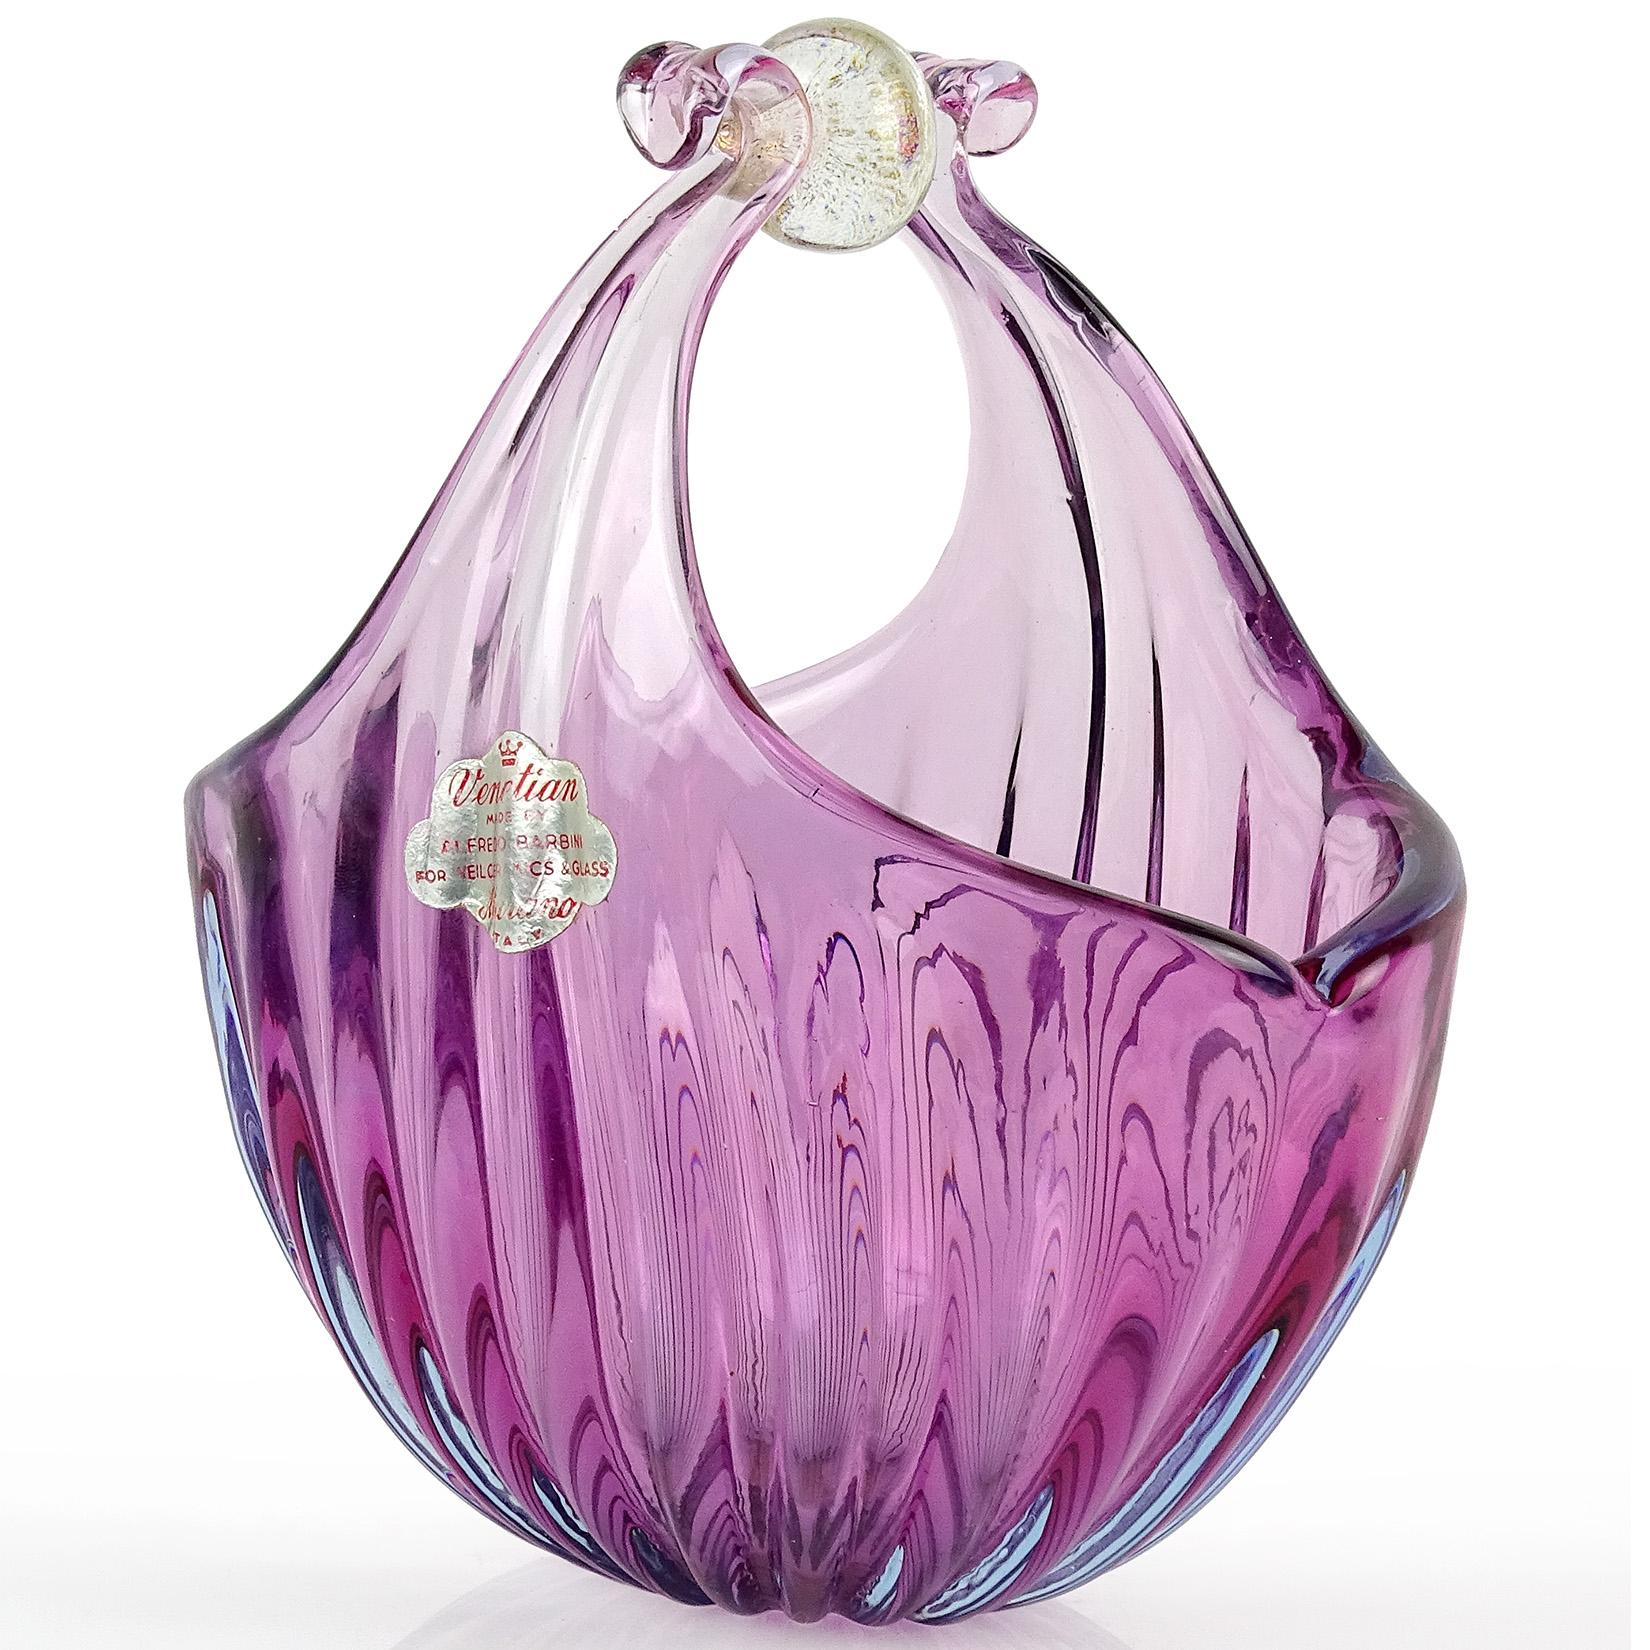 Beautiful vintage Murano hand blown Sommerso purple with blue, and gold flecks Italian art glass flower basket / vase. Documented to designer Alfredo Barbini and published in his catalog, circa 1950-1960. Still retains original labels. It has 2